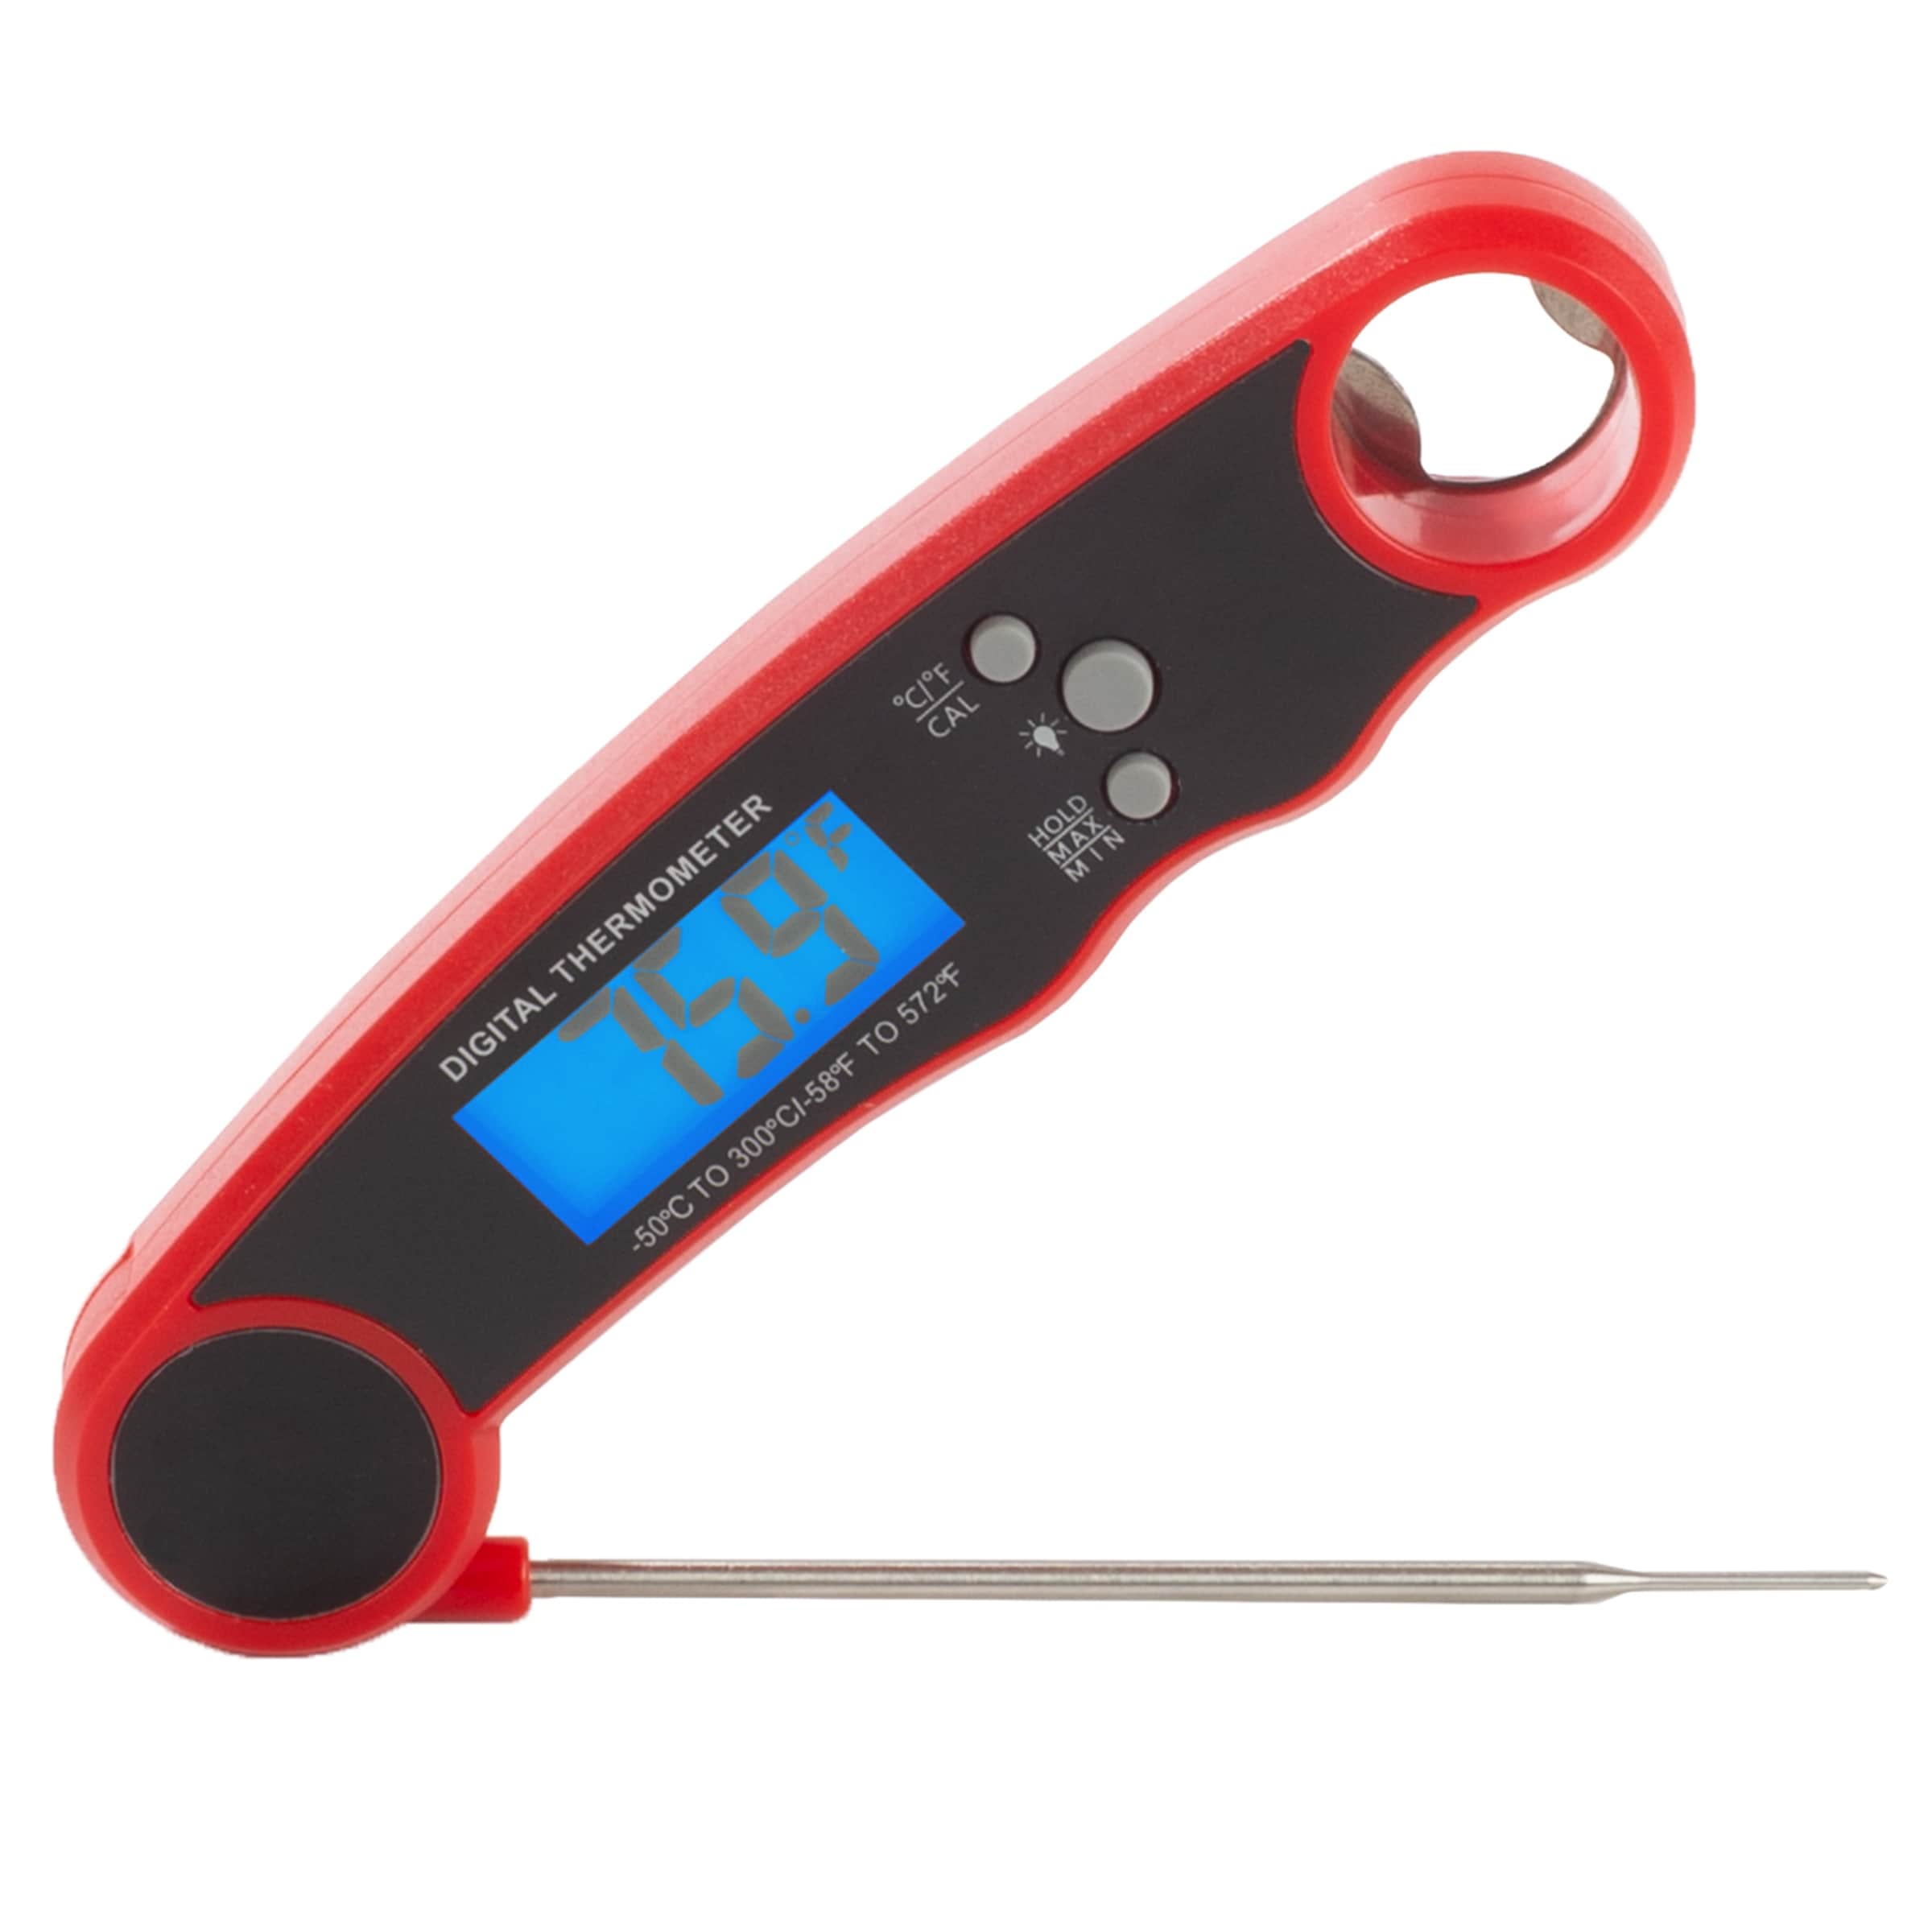 Cheer Collection Digital Meat Thermometer, Instant Read Food